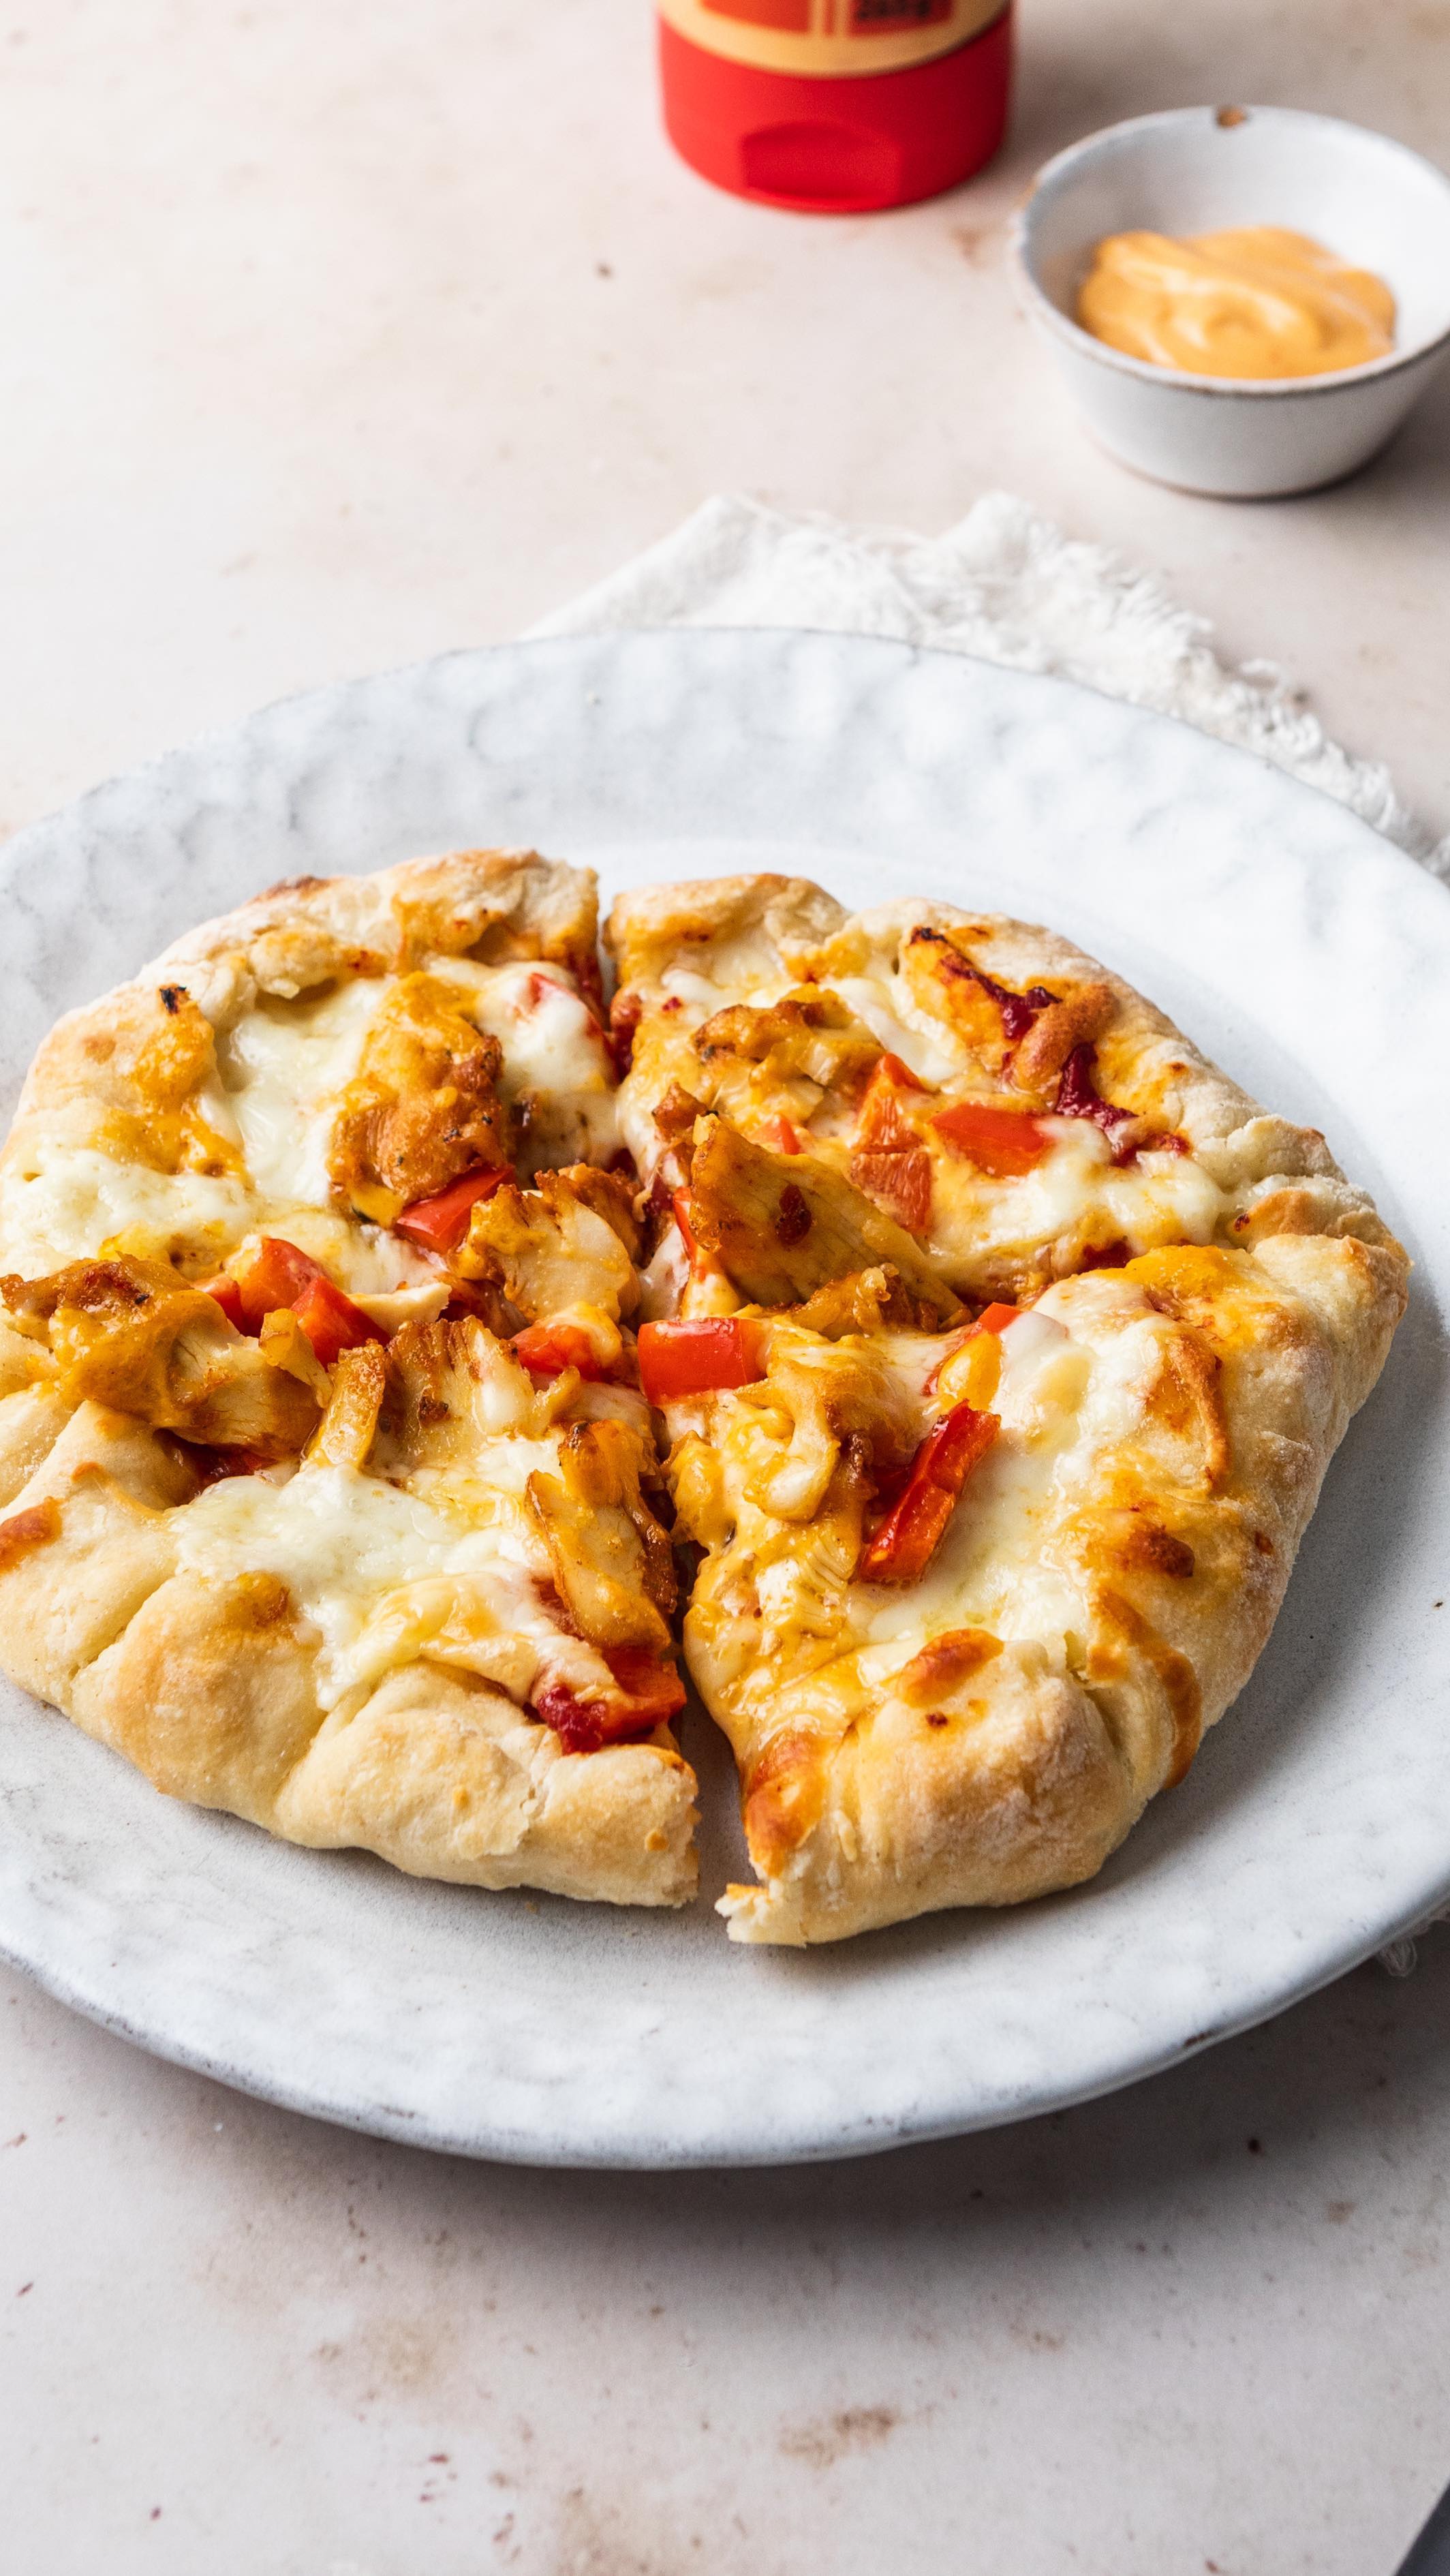 NANDOS STUFFED CRUST PIZZA 🍕 

Perfect Friday fakeaway sorted 😍 HIT SAVE to give this a try! Happy Friday!

Recipe created for @believe.bykimfrench 

#recipereels #nandosrecipe #fakeaway